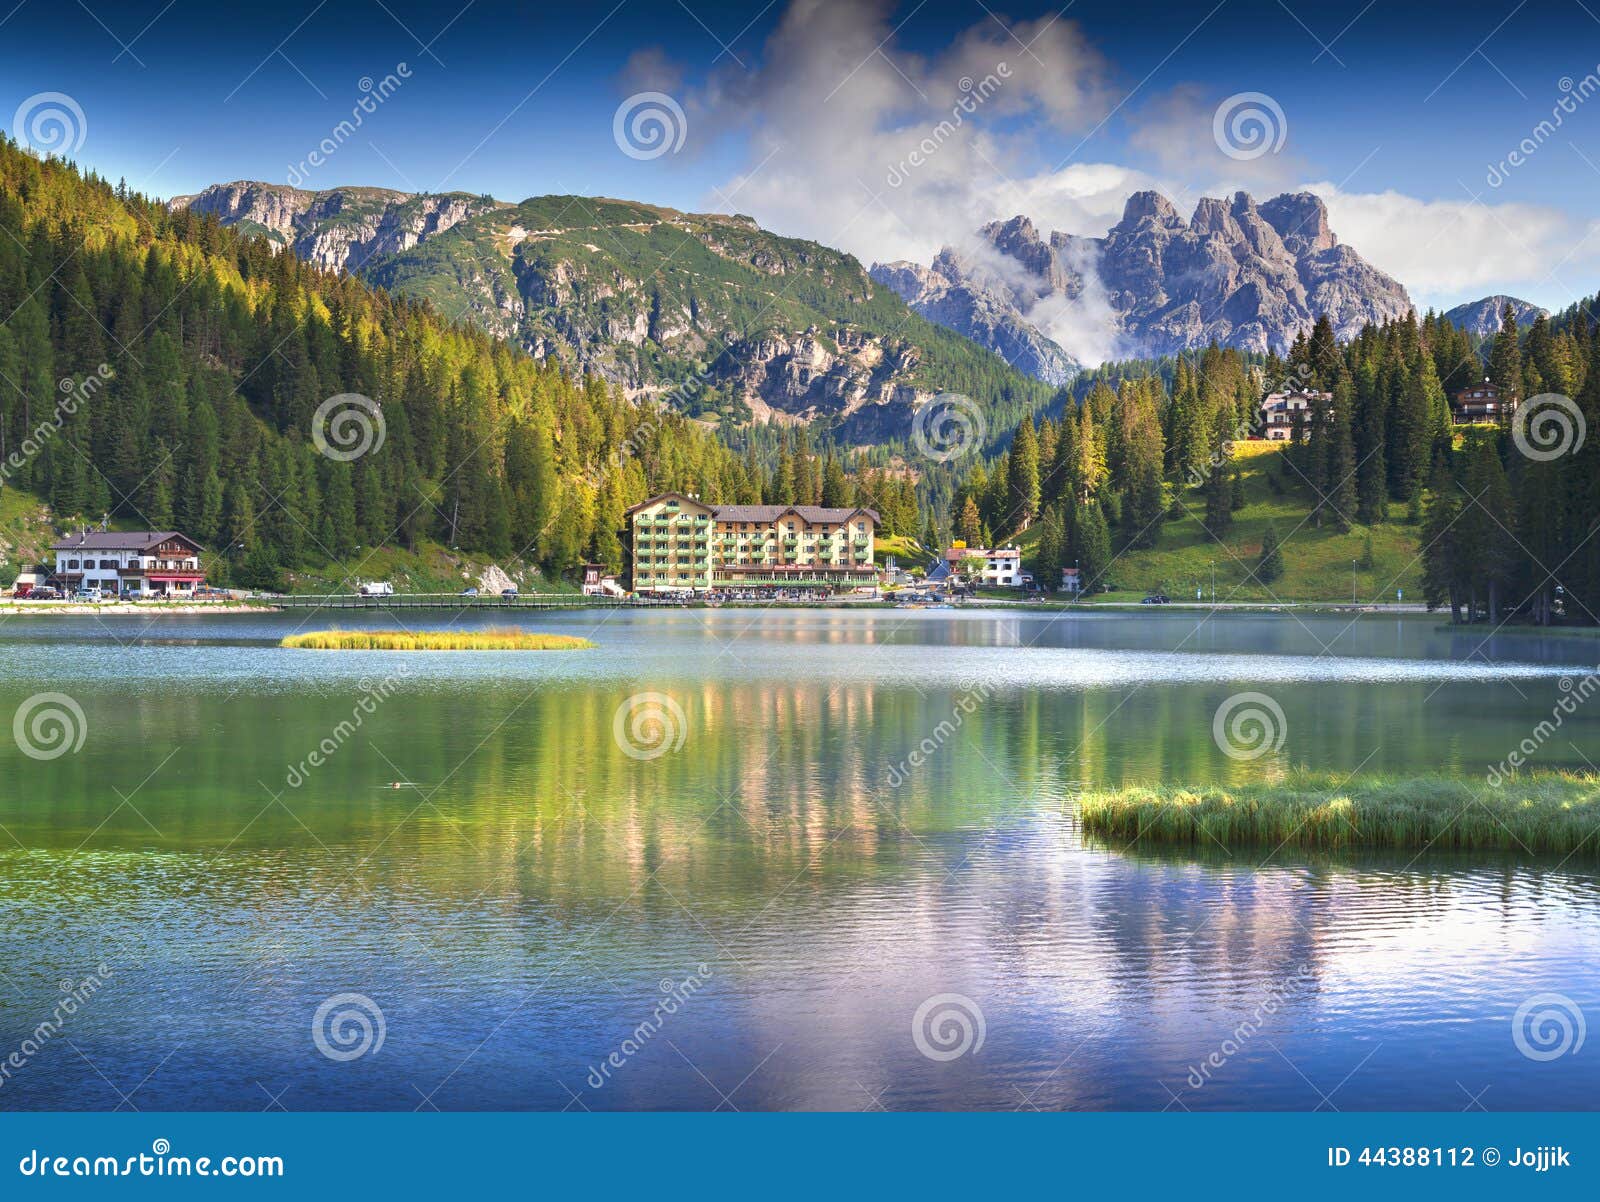 beautiful summer morning on the lake misurina, in italy alps, tr